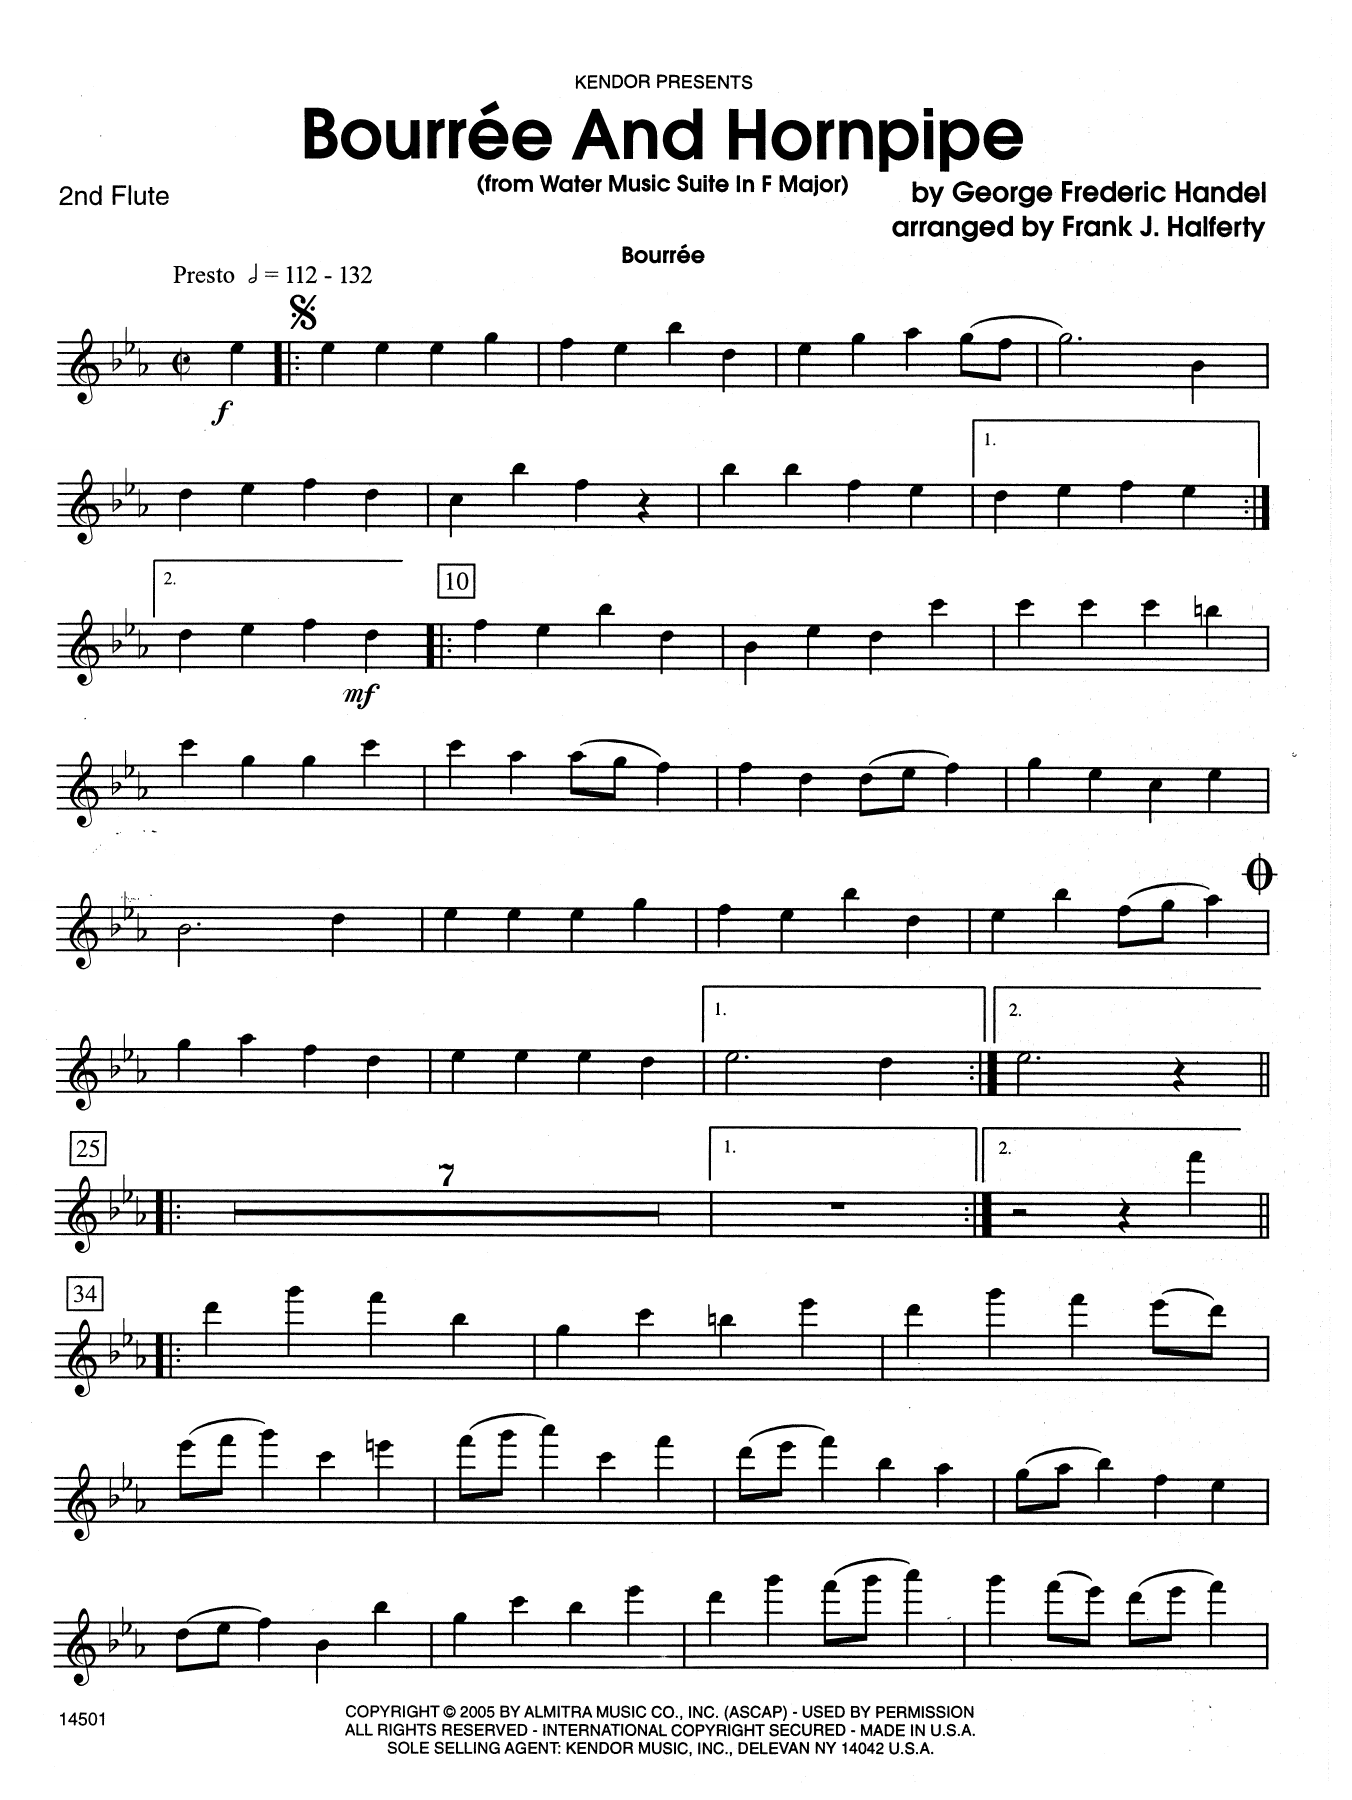 Download Frank J. Halferty Bourree And Hornpipe (from Water Music Sheet Music